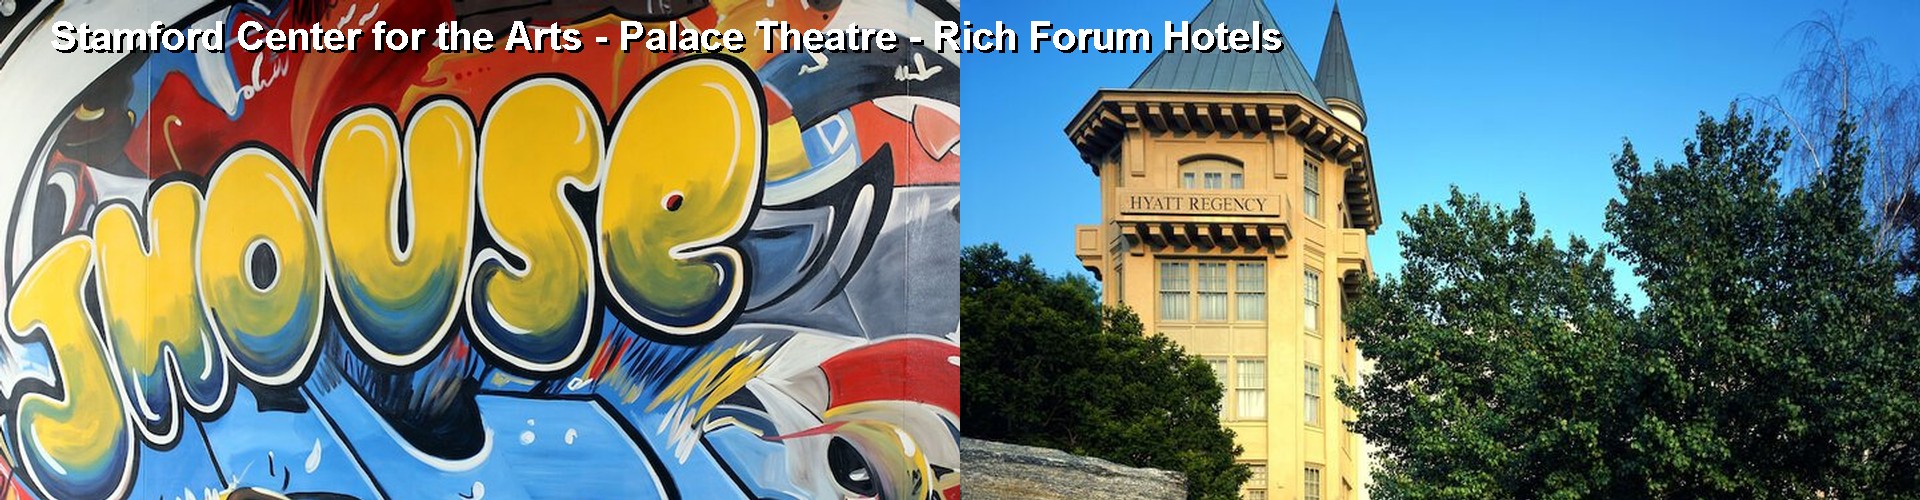 5 Best Hotels near Stamford Center for the Arts - Palace Theatre - Rich Forum